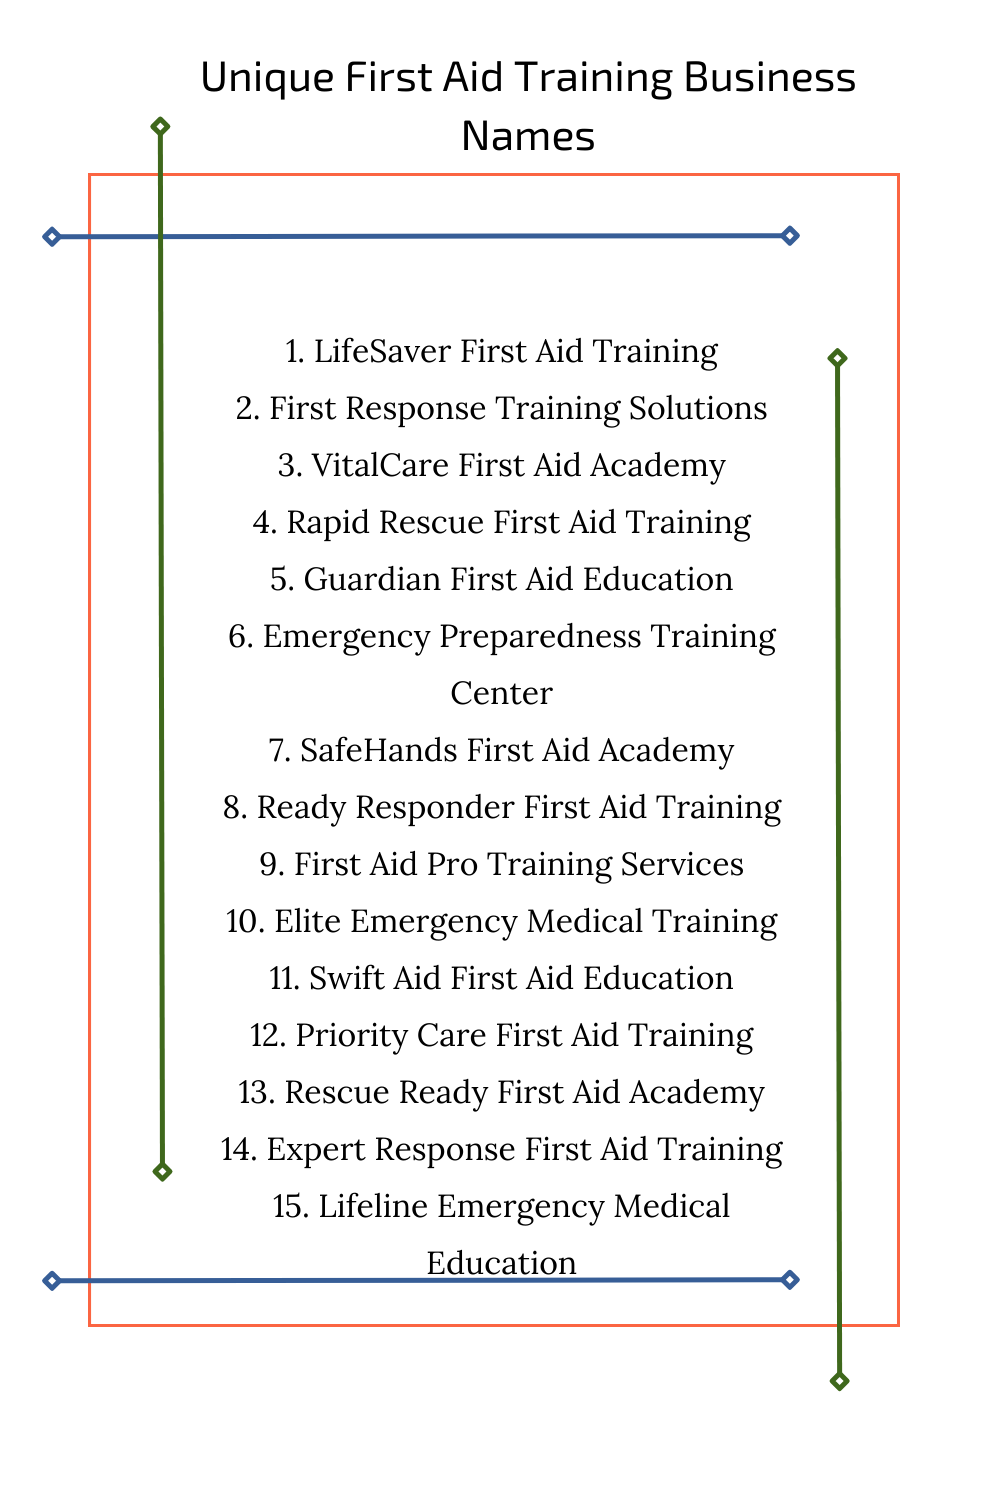 Unique First Aid Training Business Names